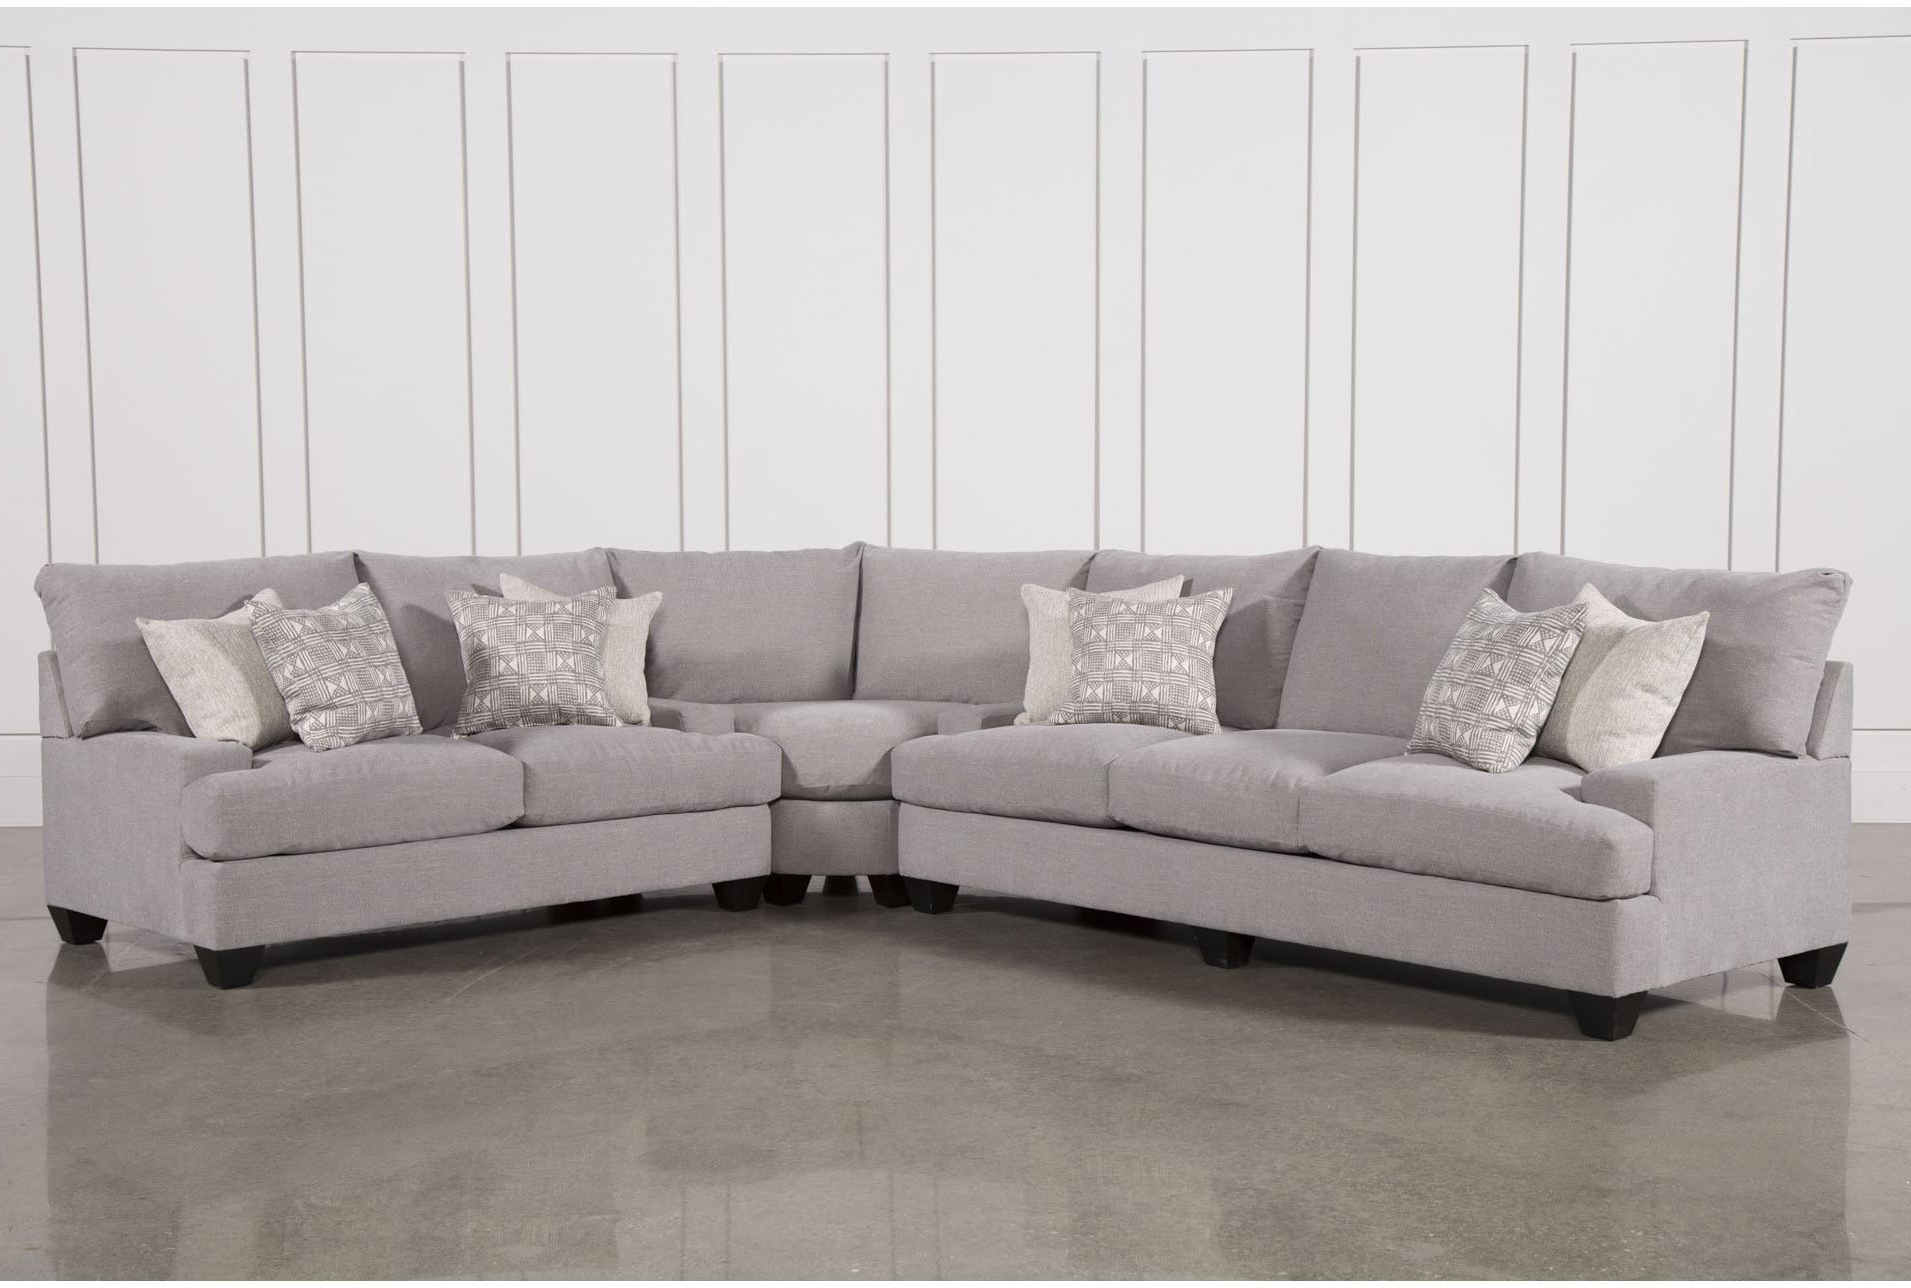 Sierra Down 3 Piece Sectionals With Laf Chaise